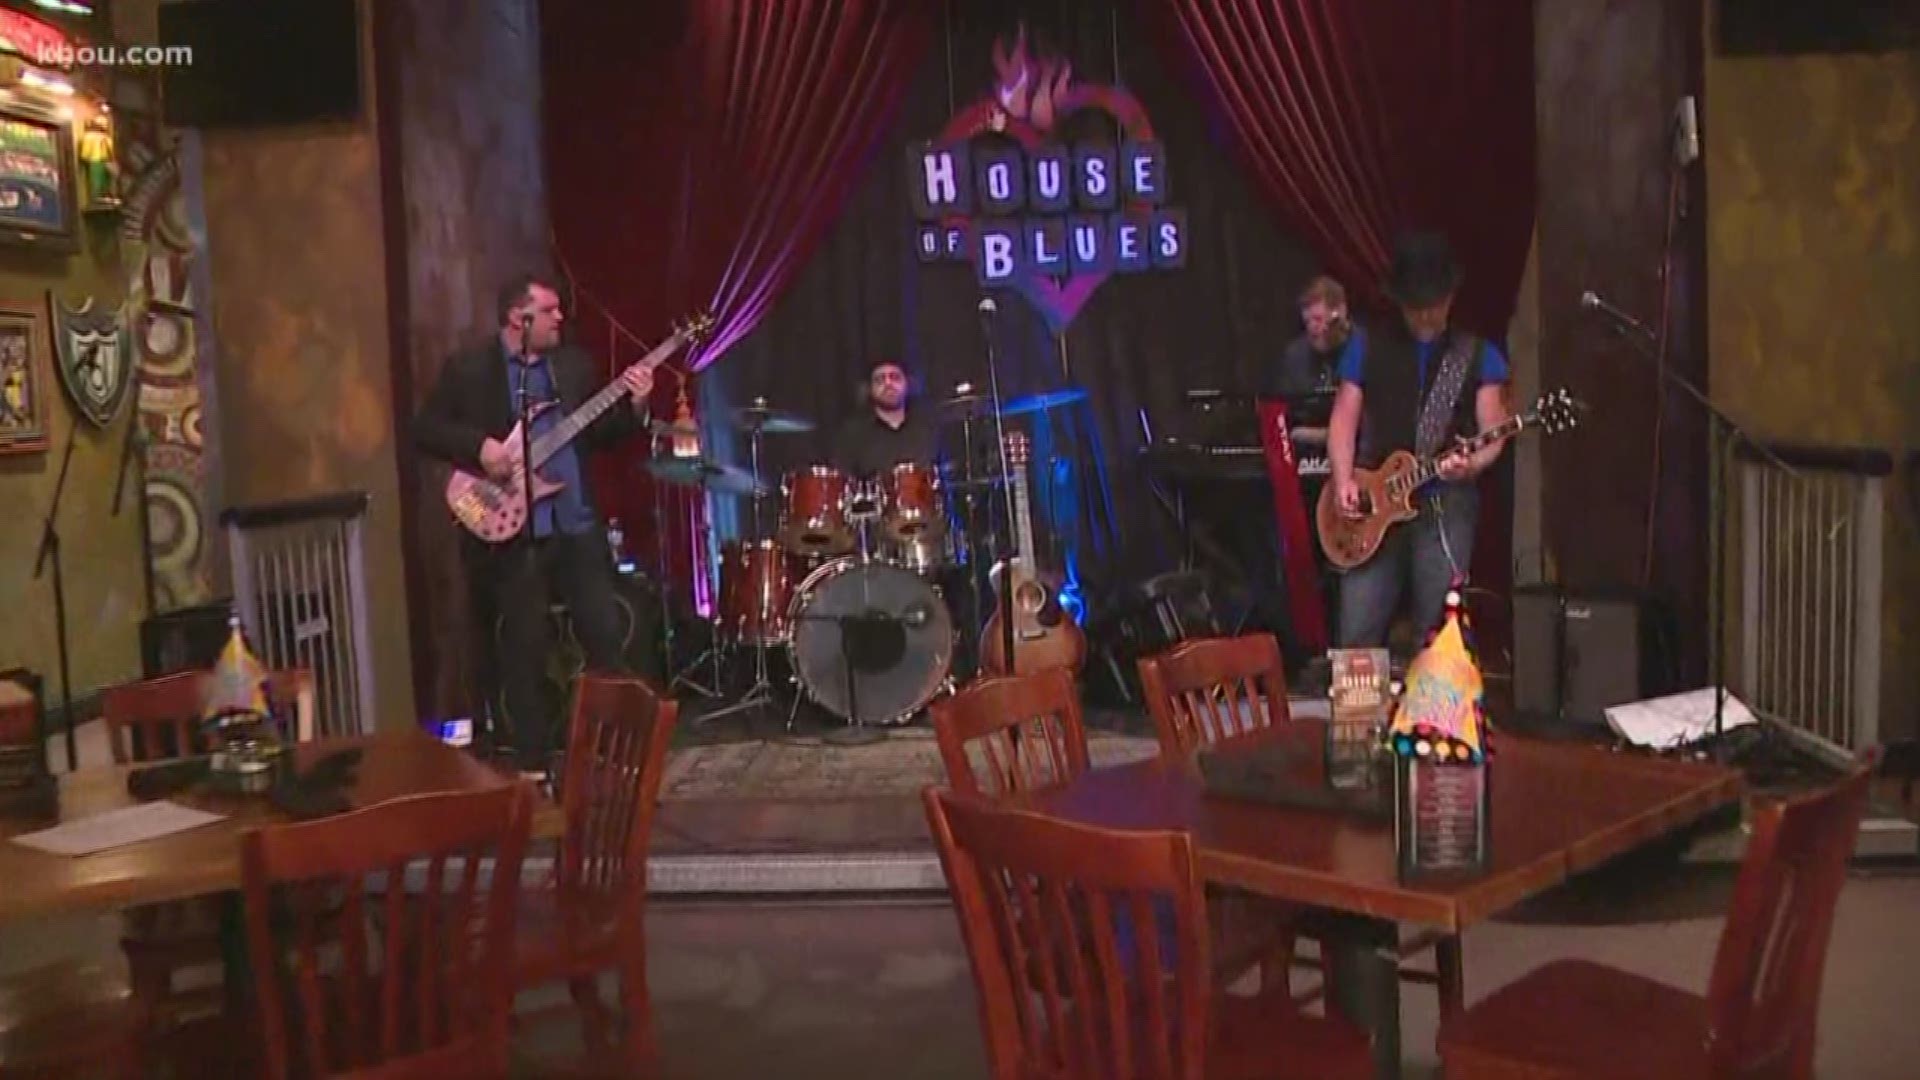 #HTownRush's Ruben Galvan is live from the House of Blues in downtown Houston where everything is ready to go for tonight's New Year celebration. Here comes 2020!